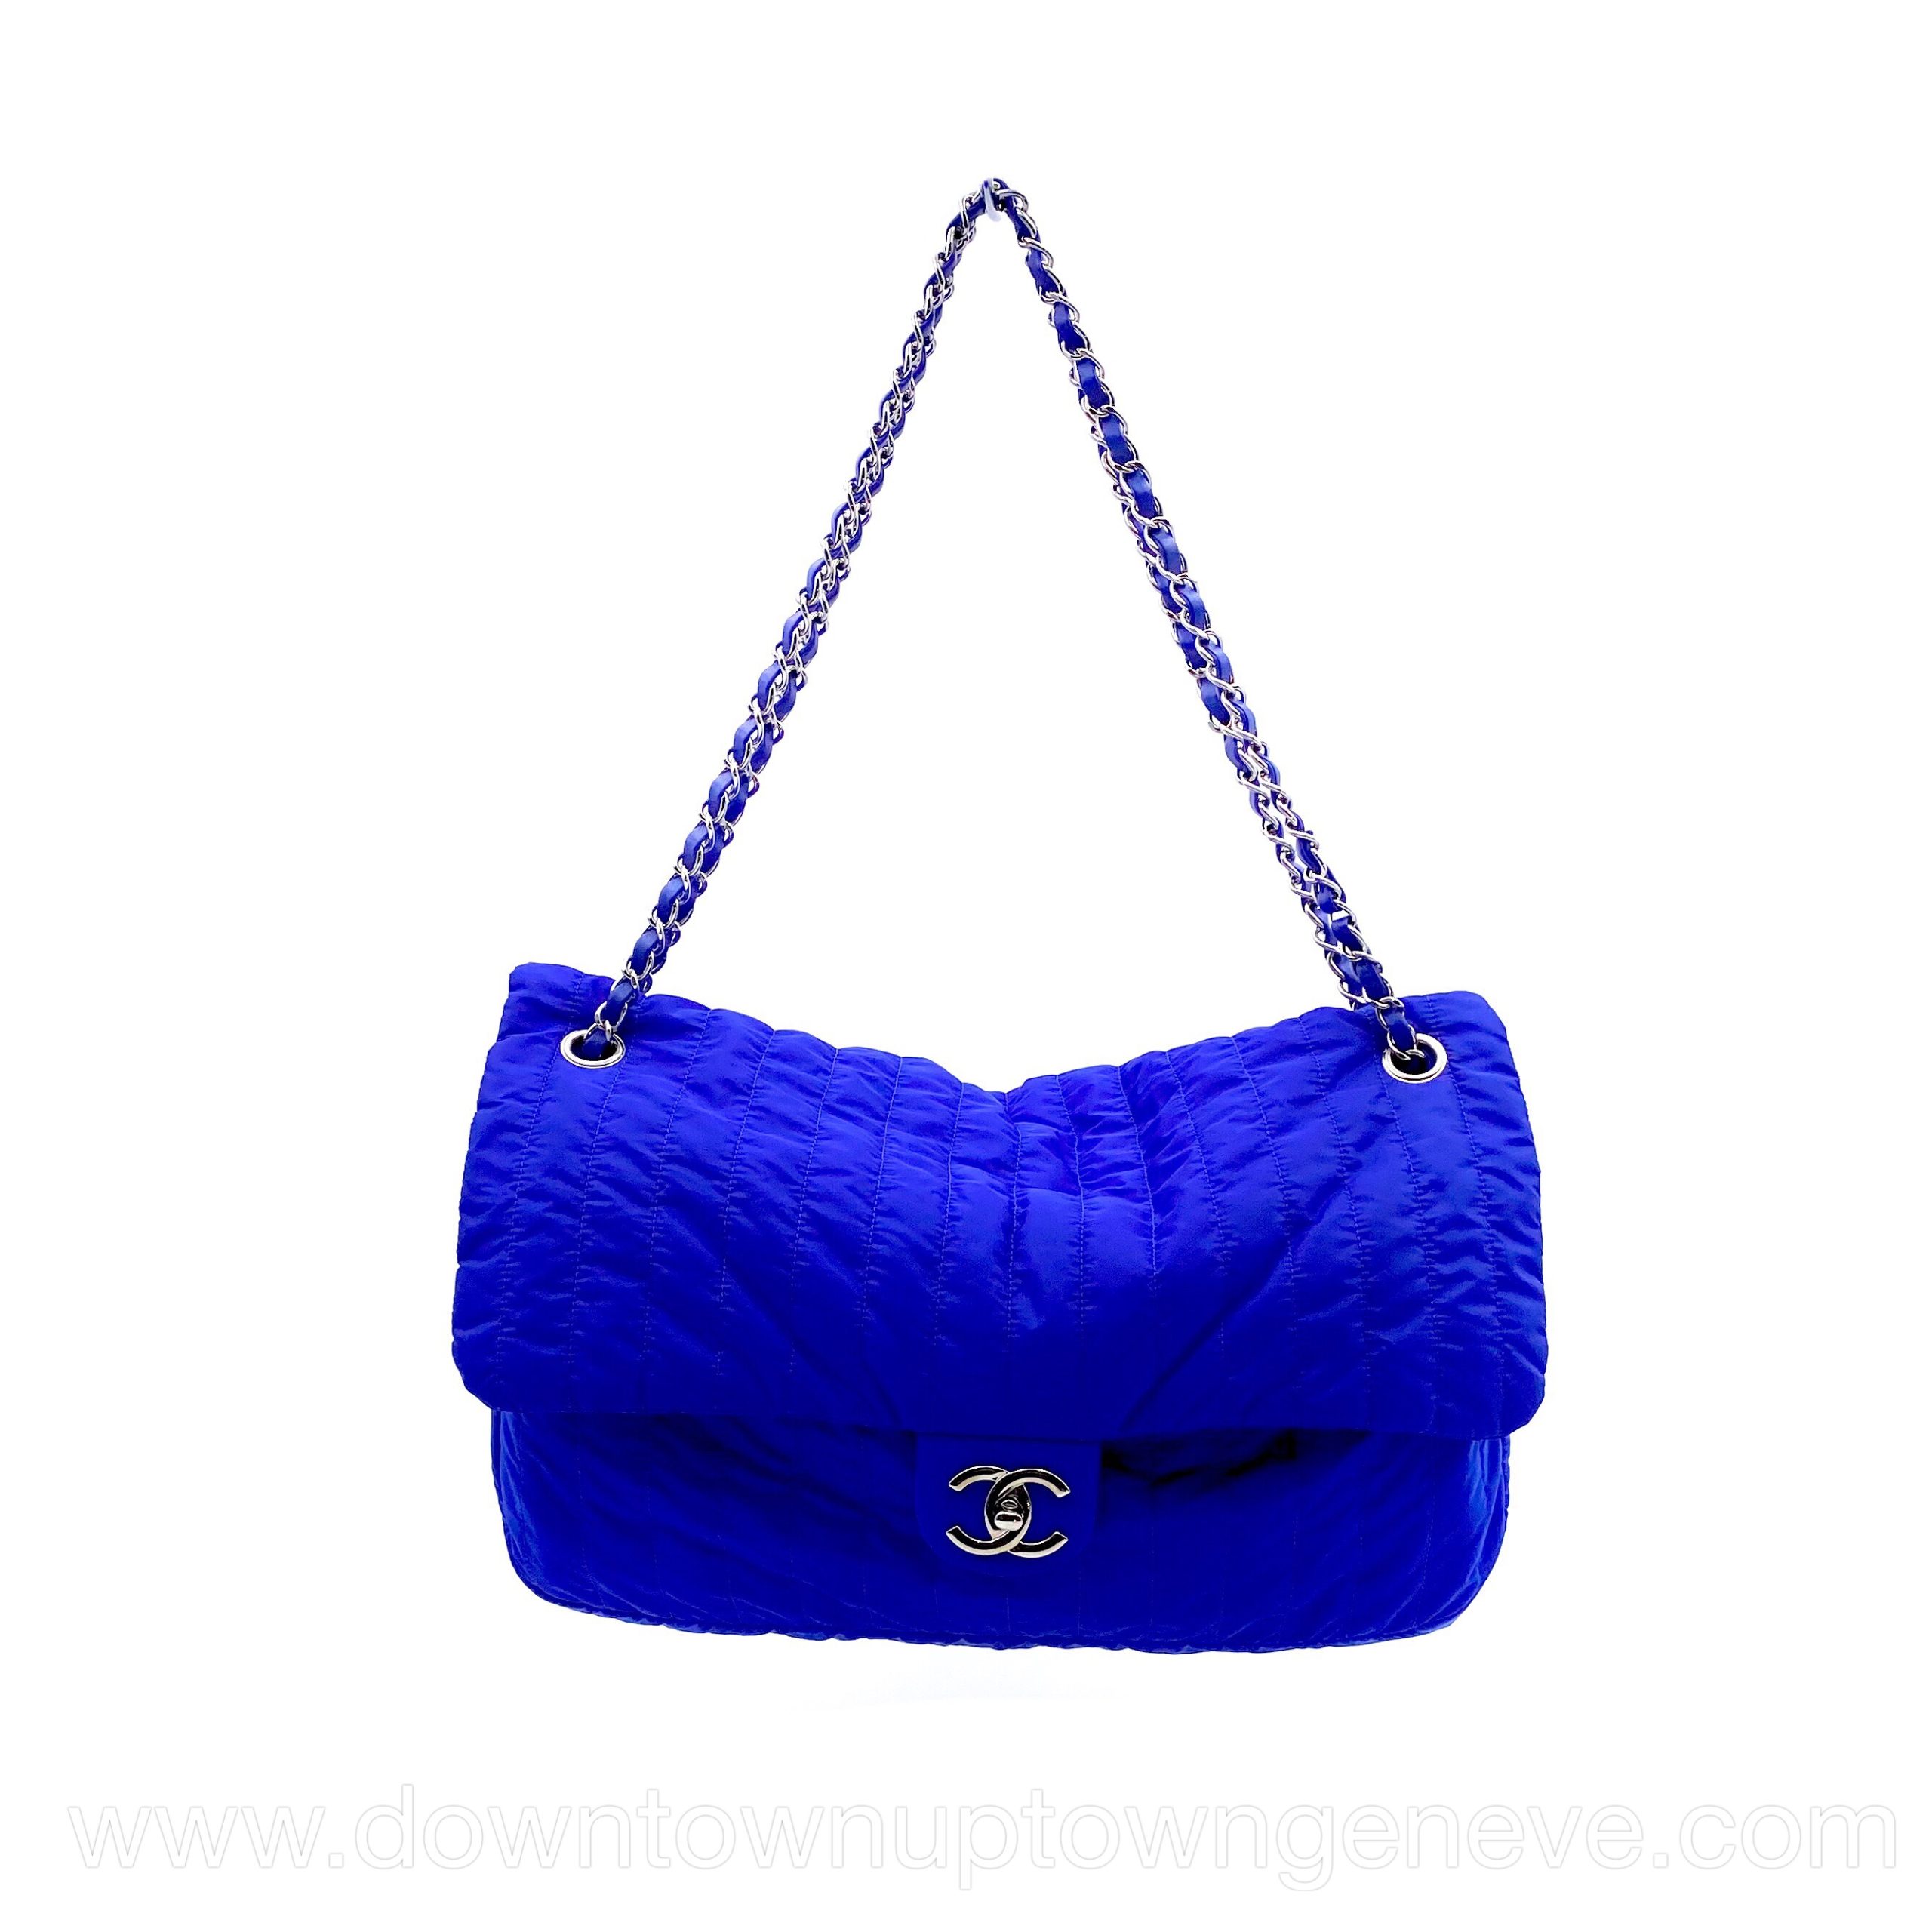 Chanel 2012 GM flap bag in electric blue nylon - DOWNTOWN UPTOWN